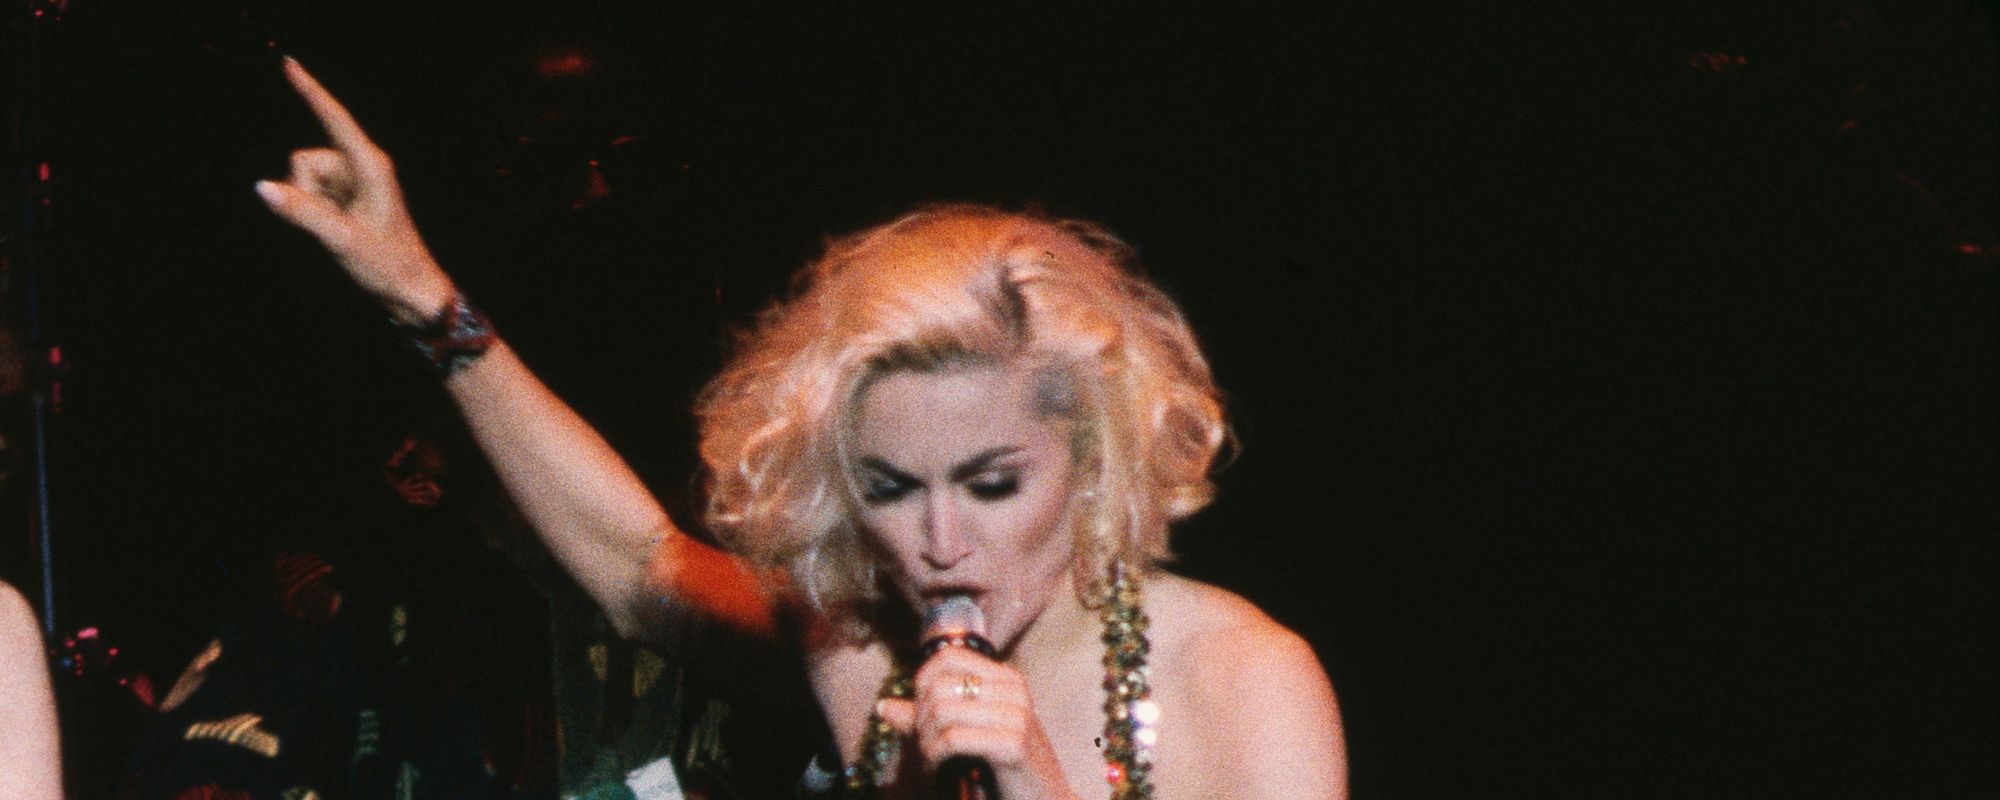 5 of the Most Empowering Anthems from Madonna